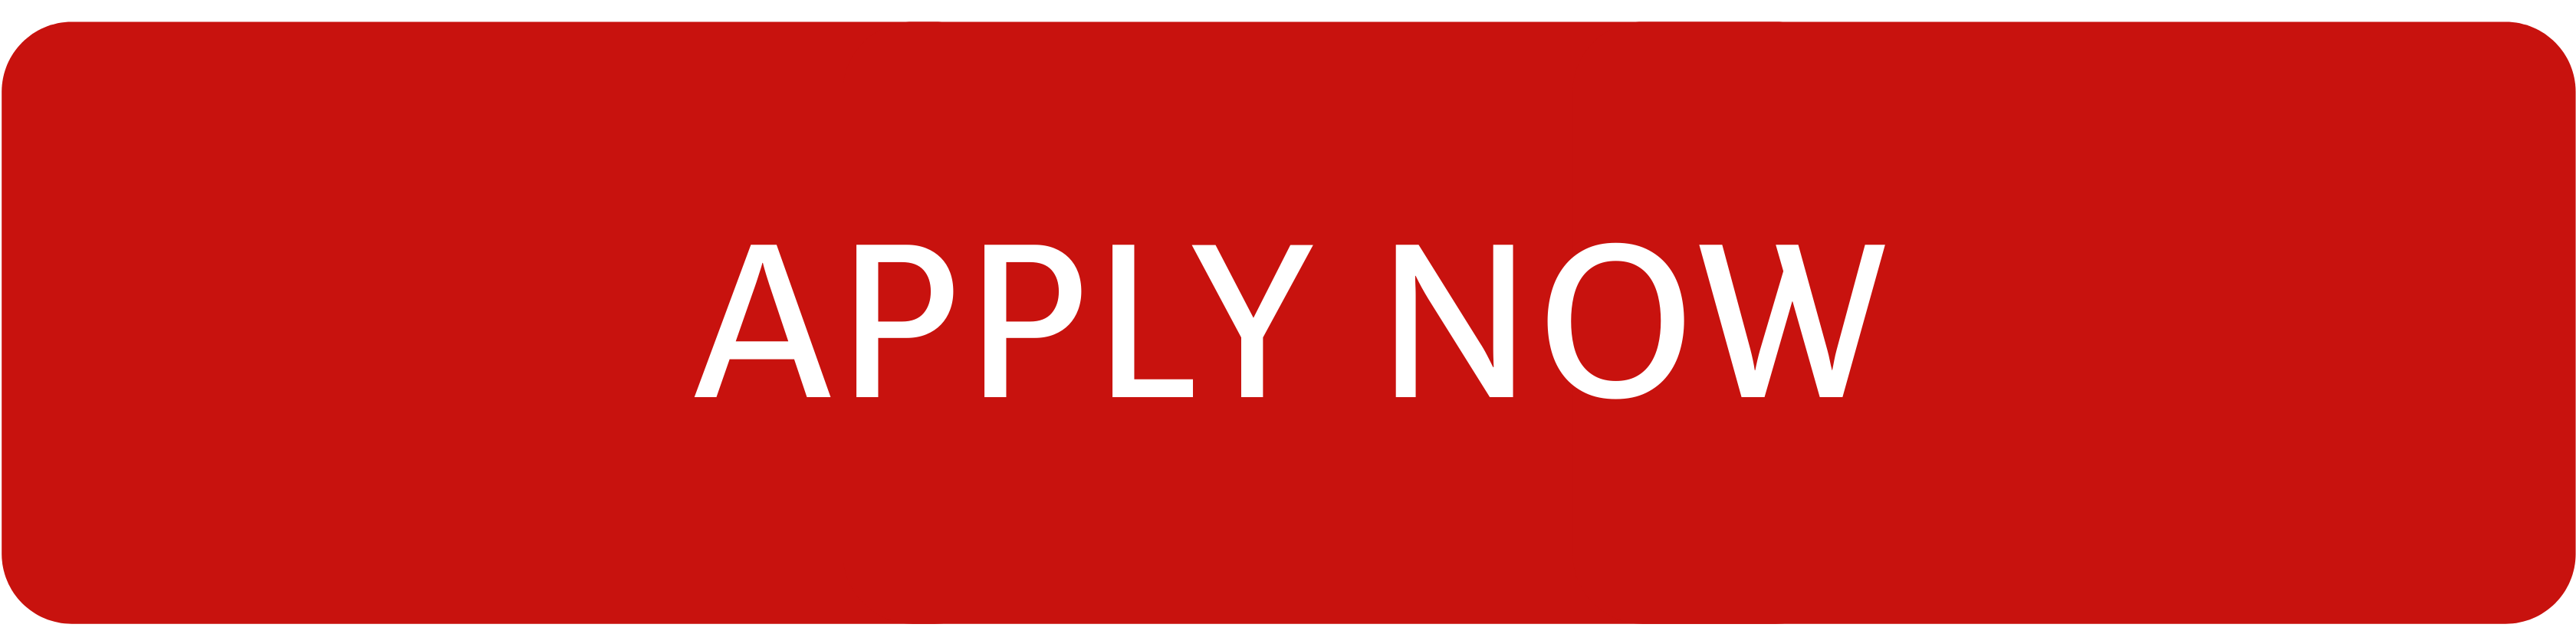 apply-nowbutton-graphics-1.png